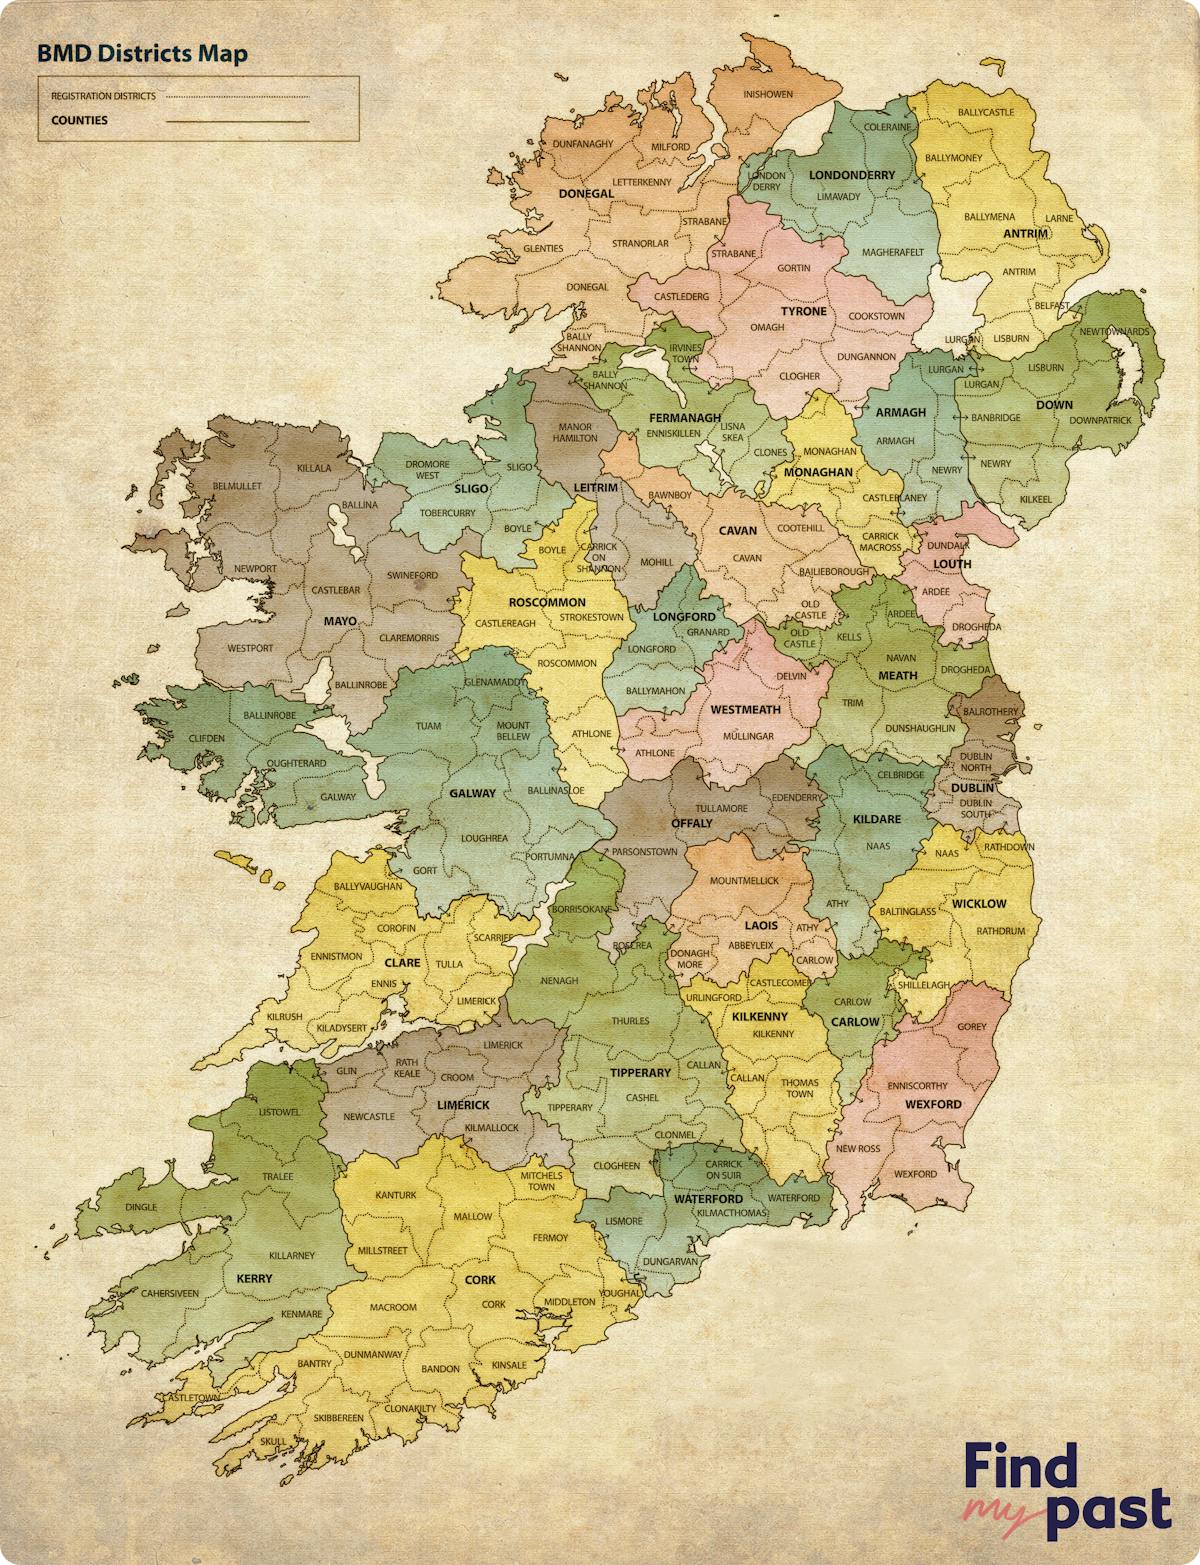 The civil registration districts map for Ireland.